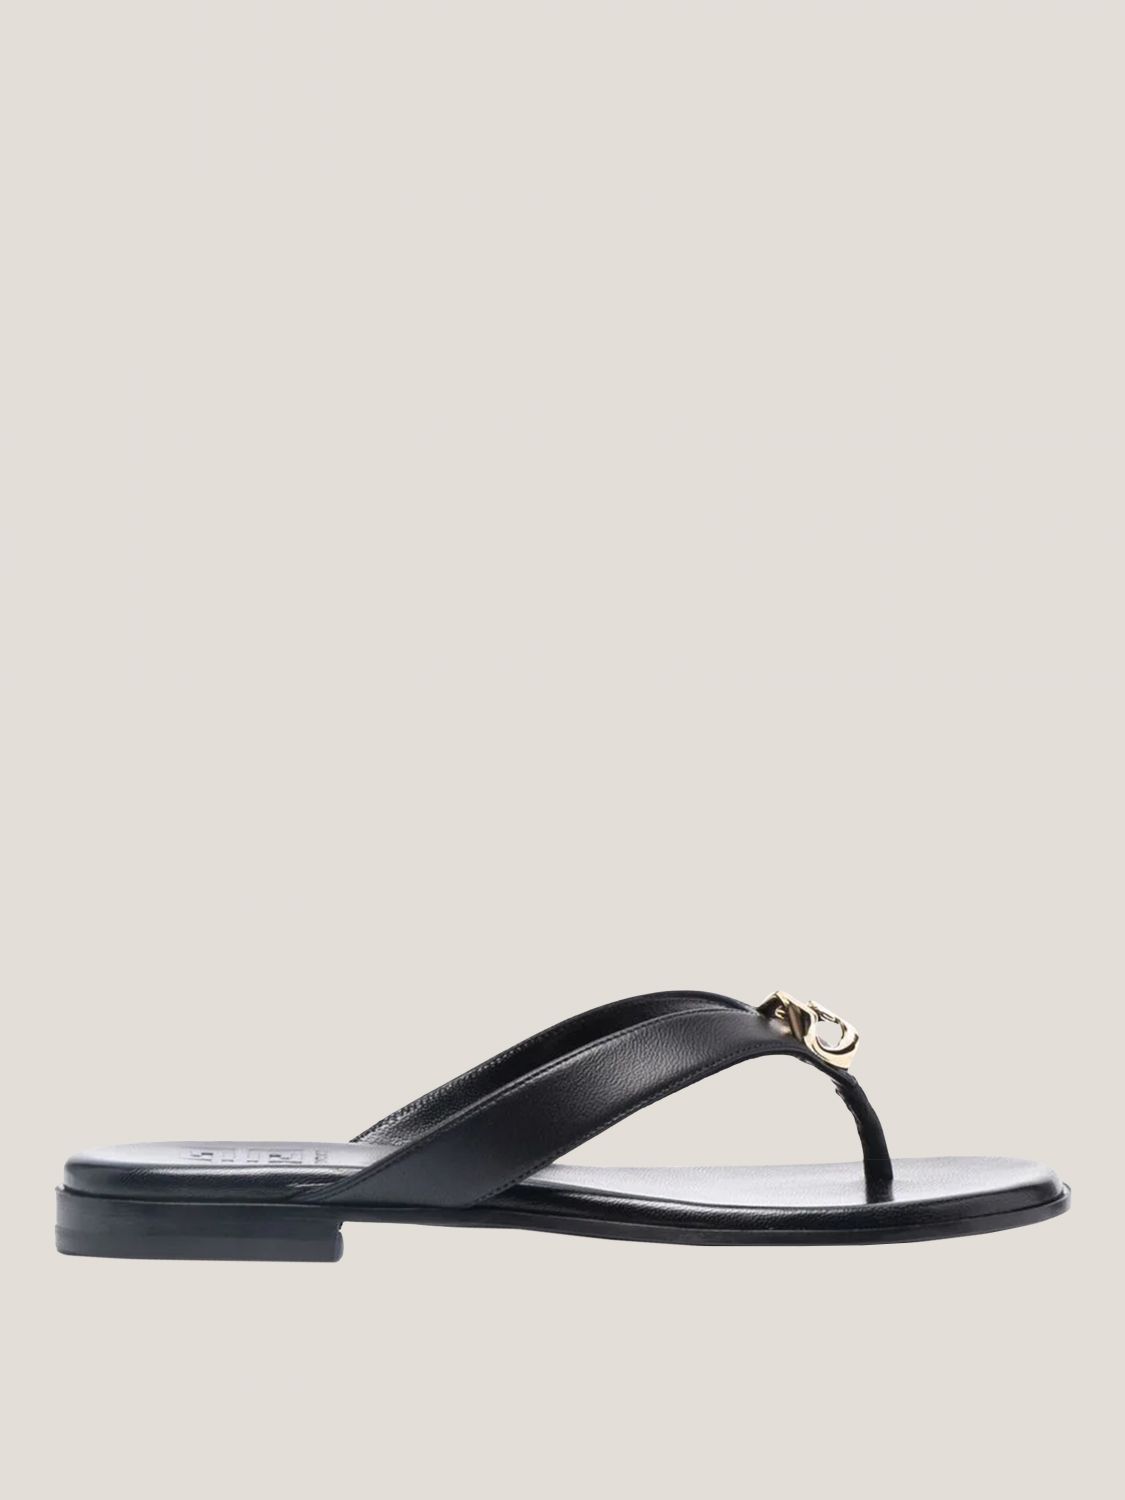 GIVENCHY: leather thong sandal with logo plaque | Flat Sandals Givenchy ...